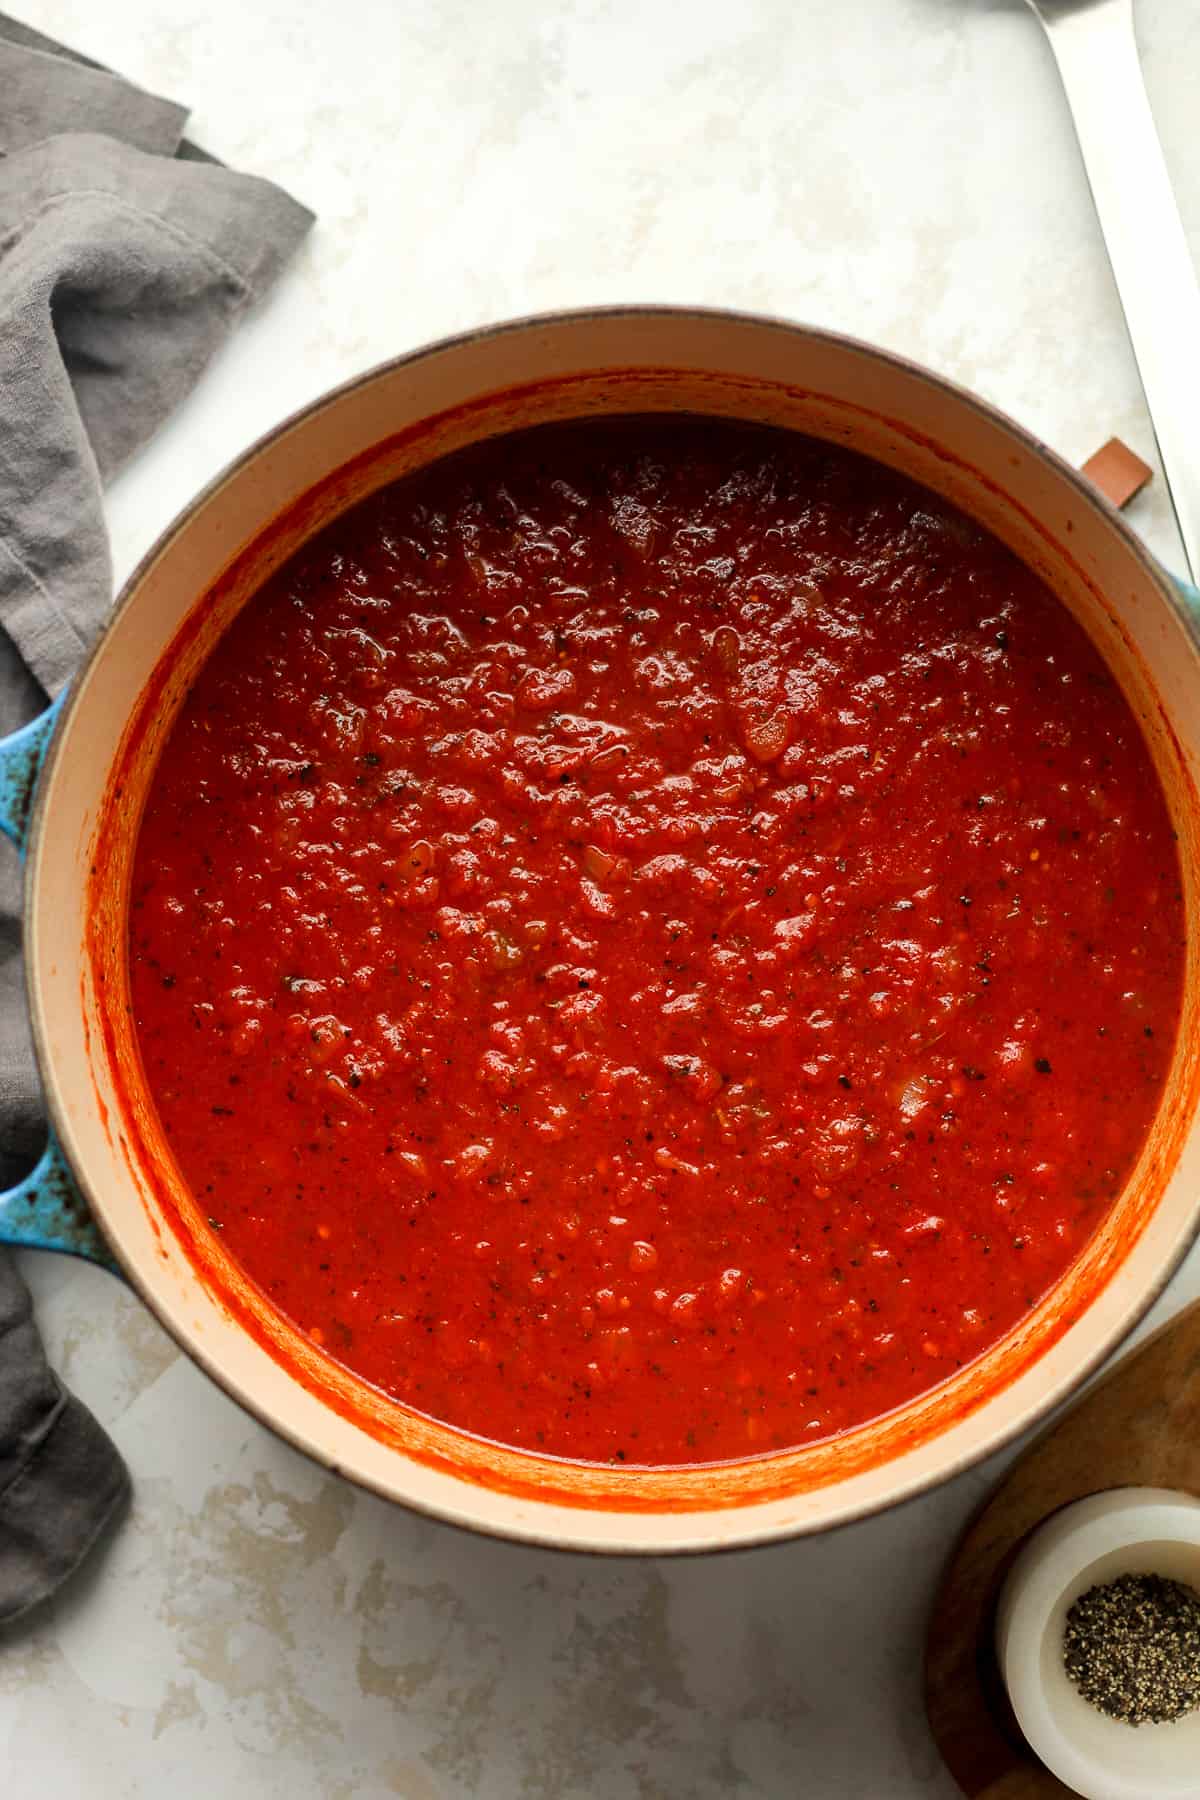 Overhead view of a stock pot of homemade Sauce.